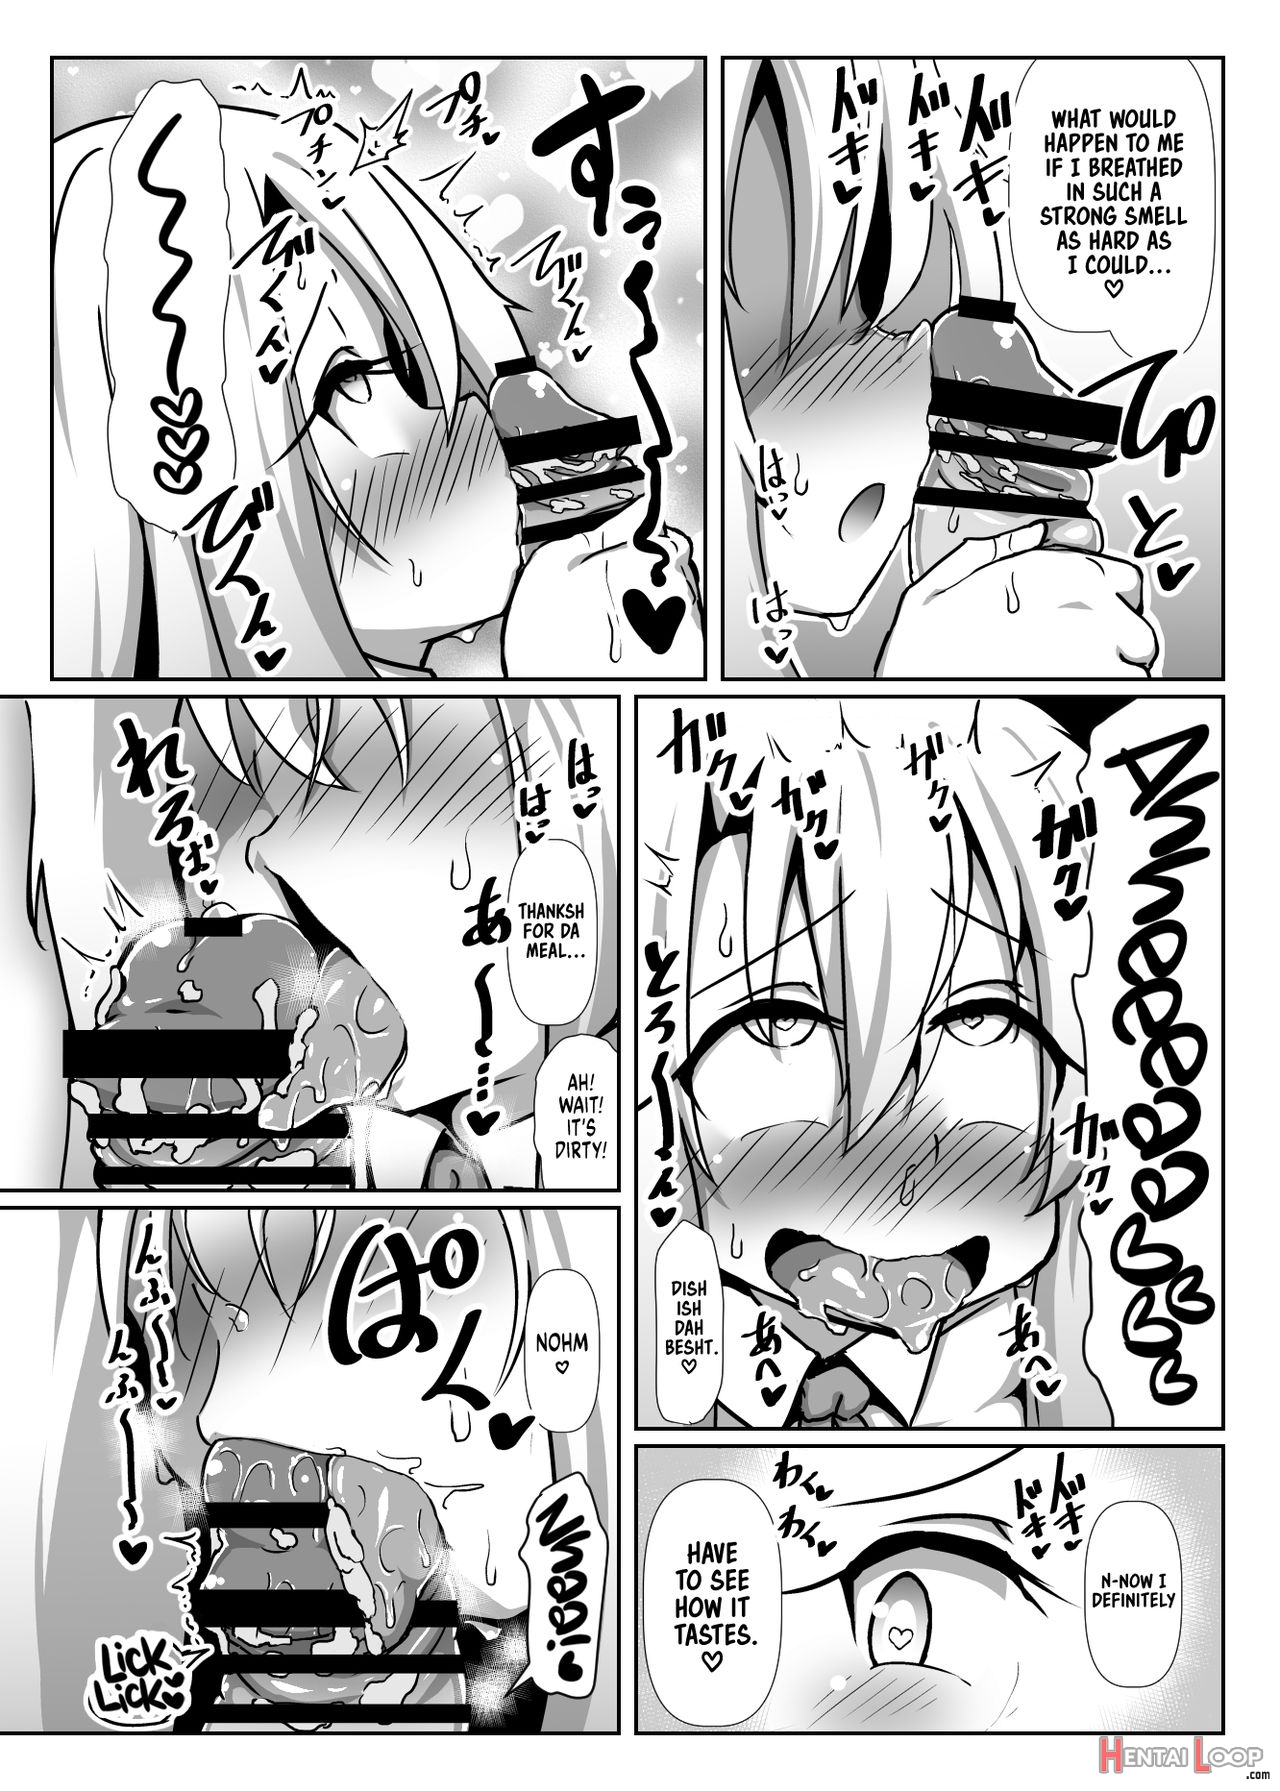 Perverted Illya-chan's Lovey Dovey Responsibility Free Baby Making Life page 9